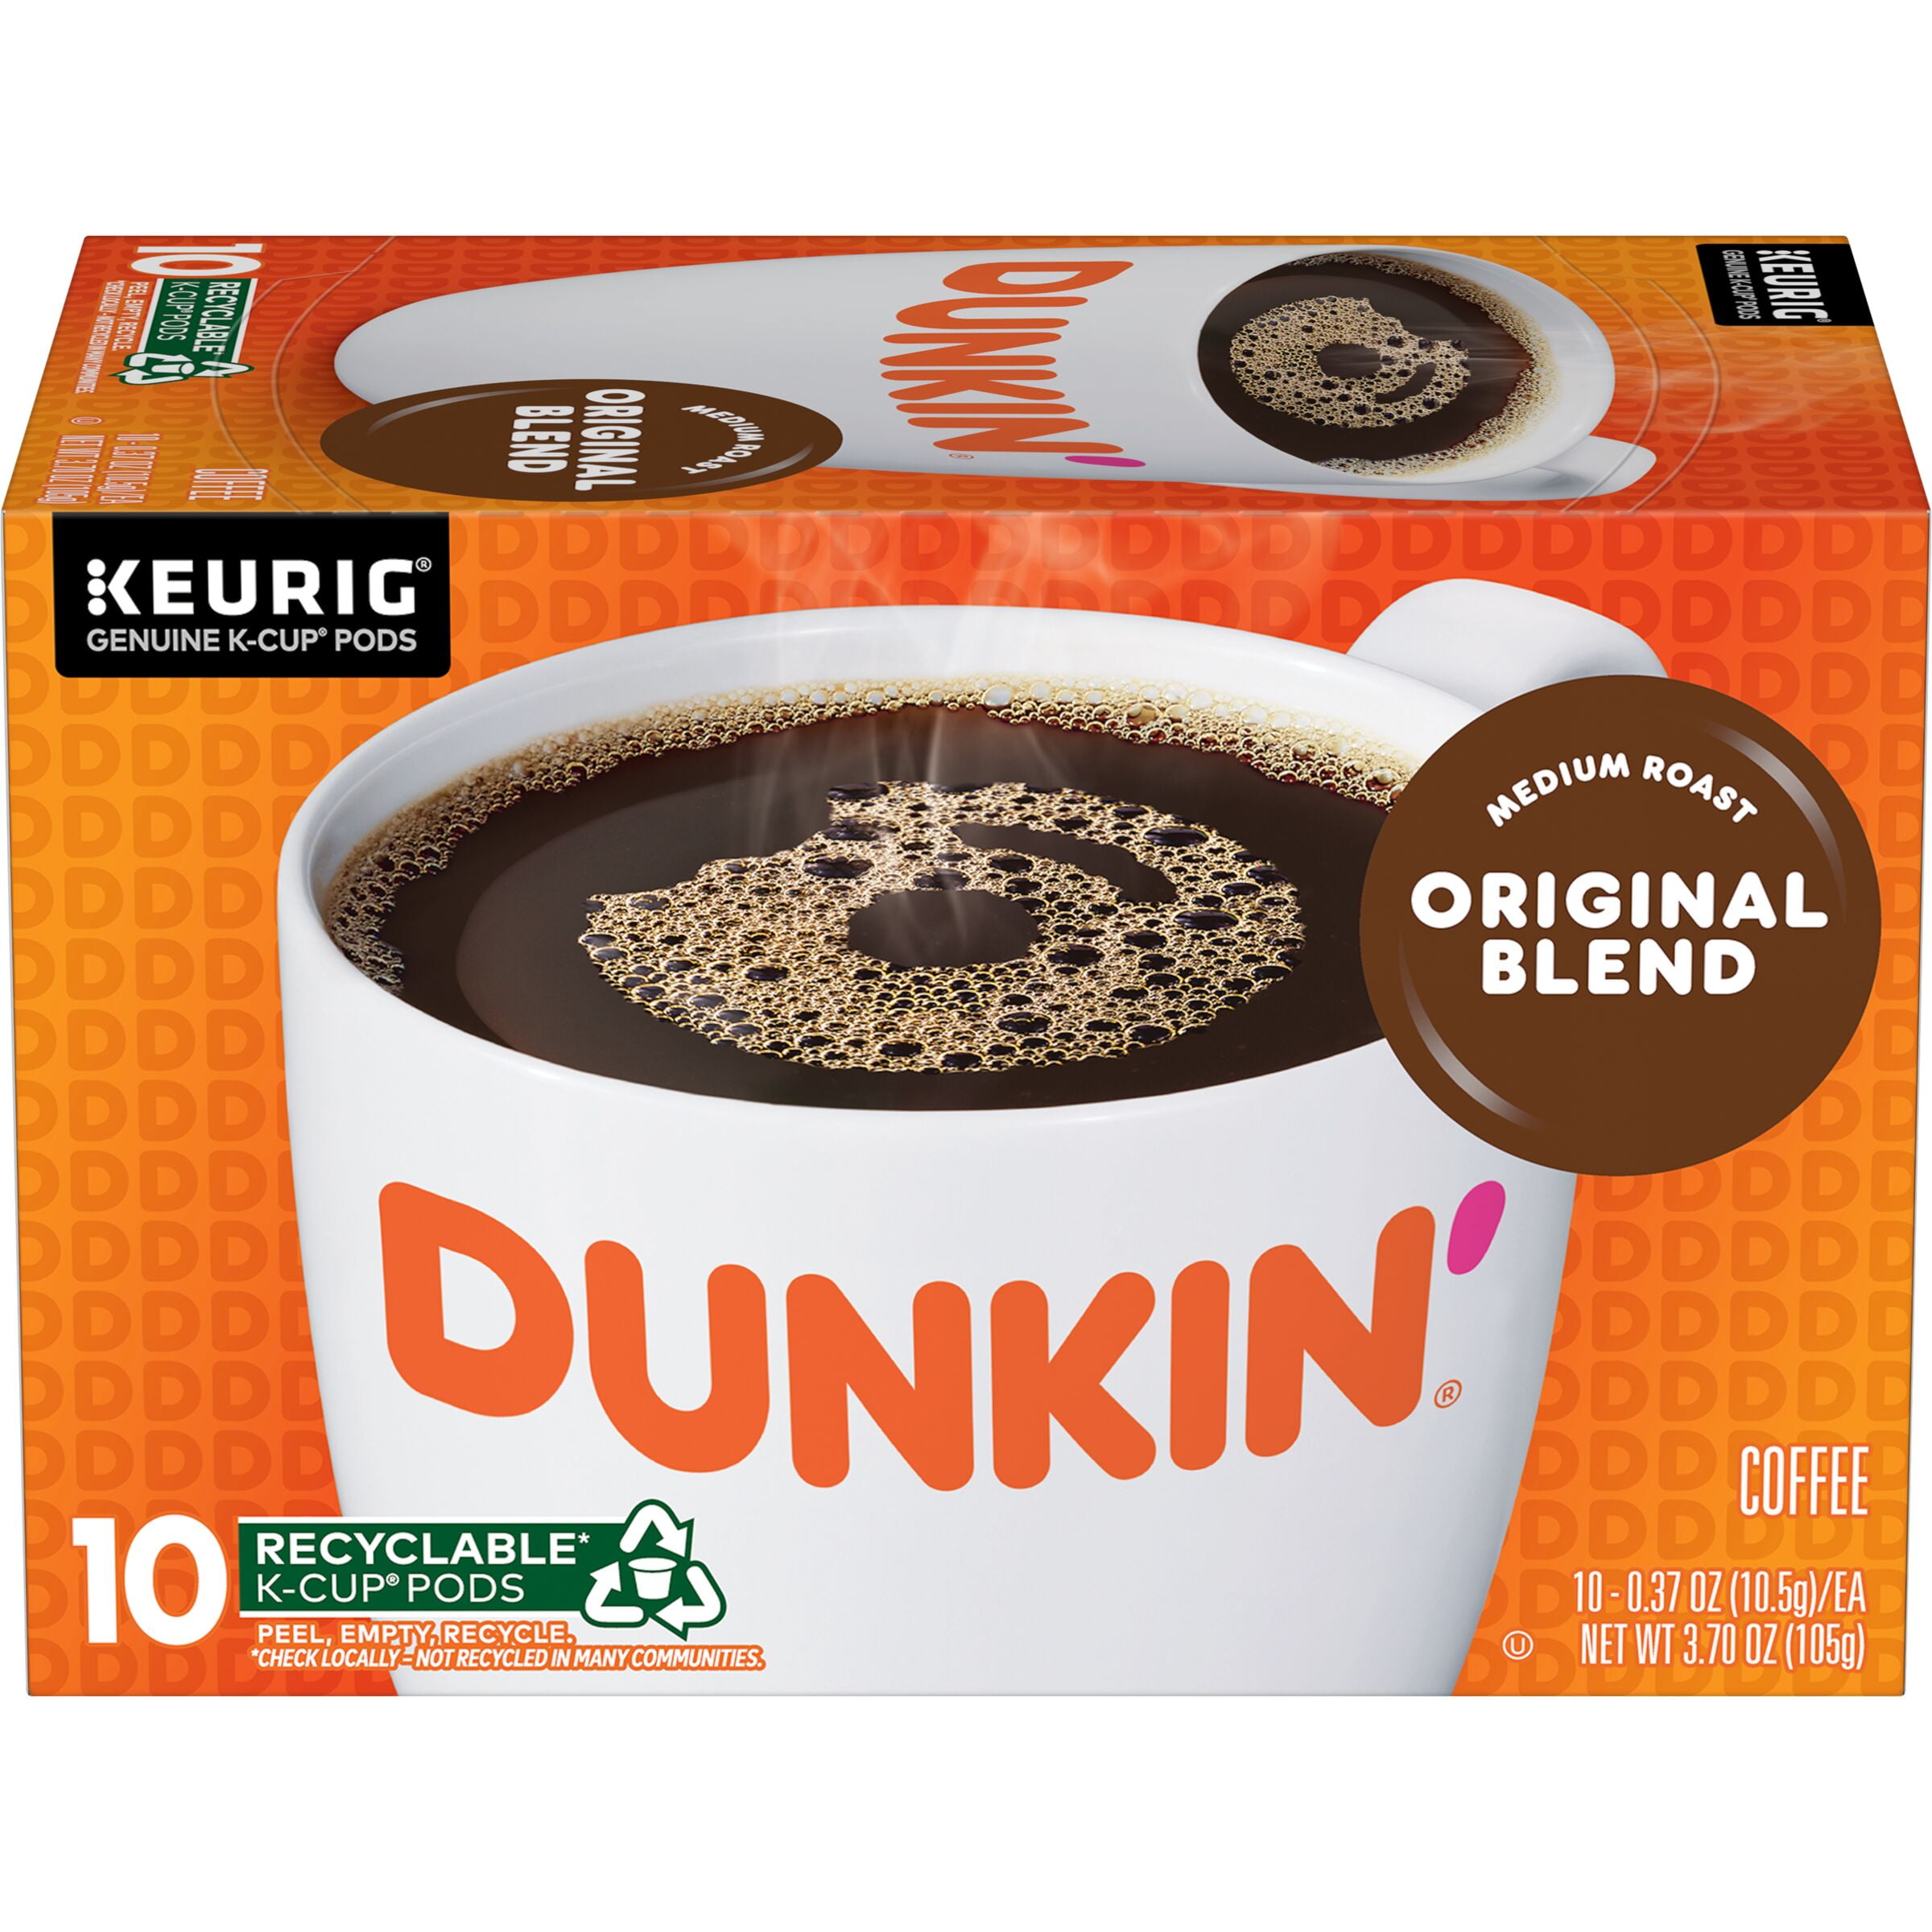 Dunkin® Cold Caramel K-Cup Coffee Pods, 10 ct - Foods Co.